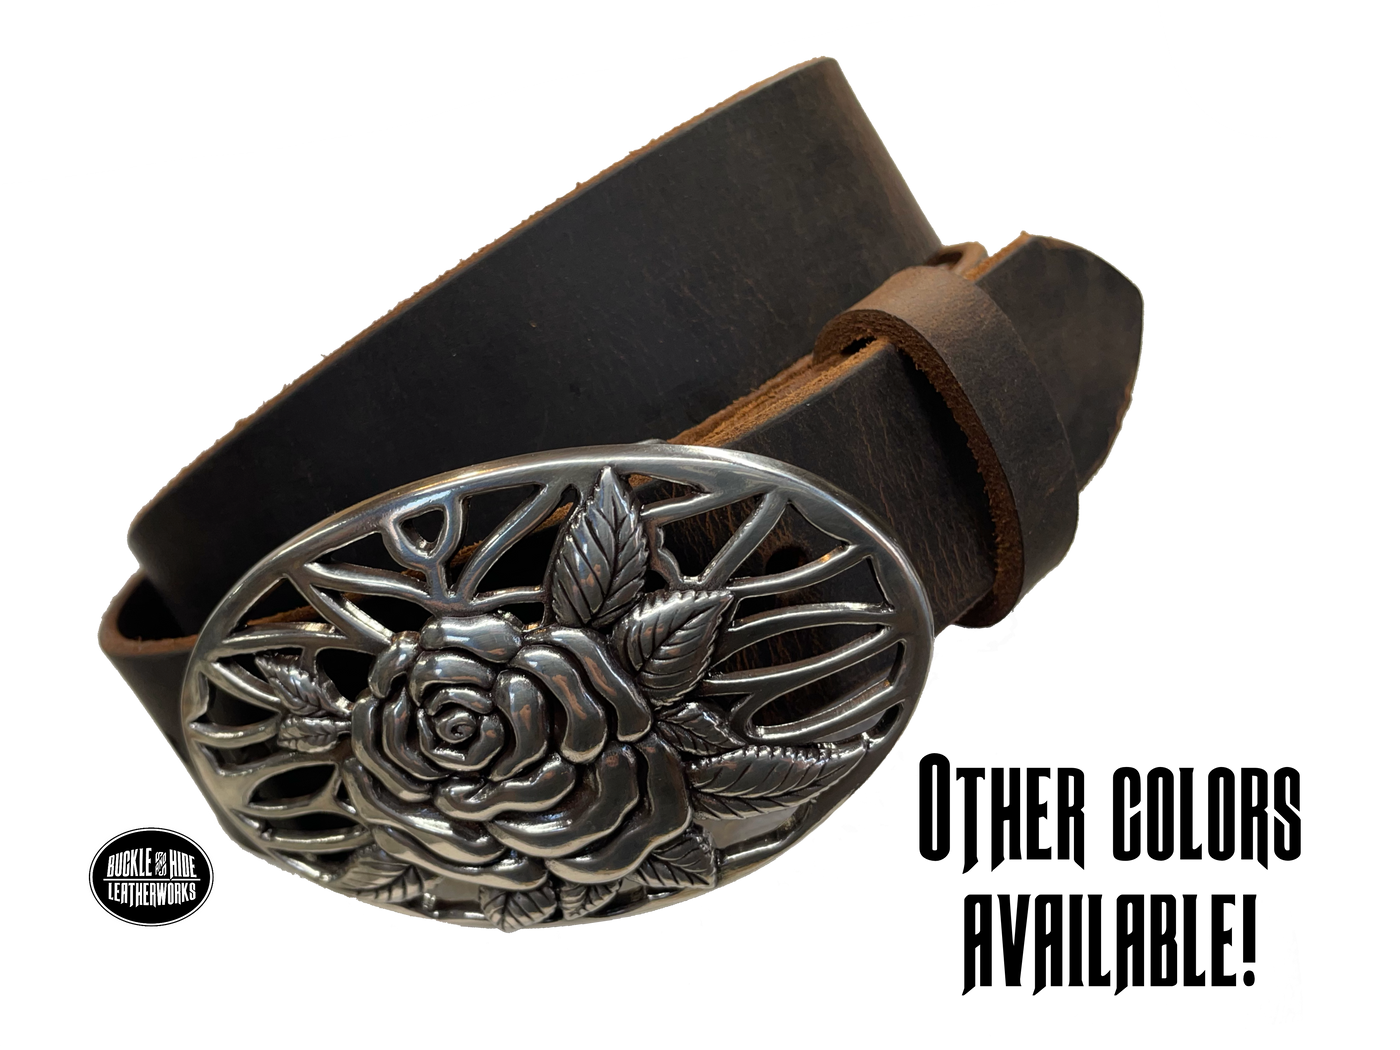 A Filigreed Rose design in Antique Nickel that looks great on plain 1 1/2" Black or Brown belt. Choose ONE belt strip color! A easy to wear oval shape that's not too big, measures approx. 3 7/8" wide by 2 1/2" tall. Belt is made from a single strip of leather in our shop in Smyrna, TN. Buckle is Imported. Available in our shop just outside Nashville in Smyrna, TN as well as online. Main picture